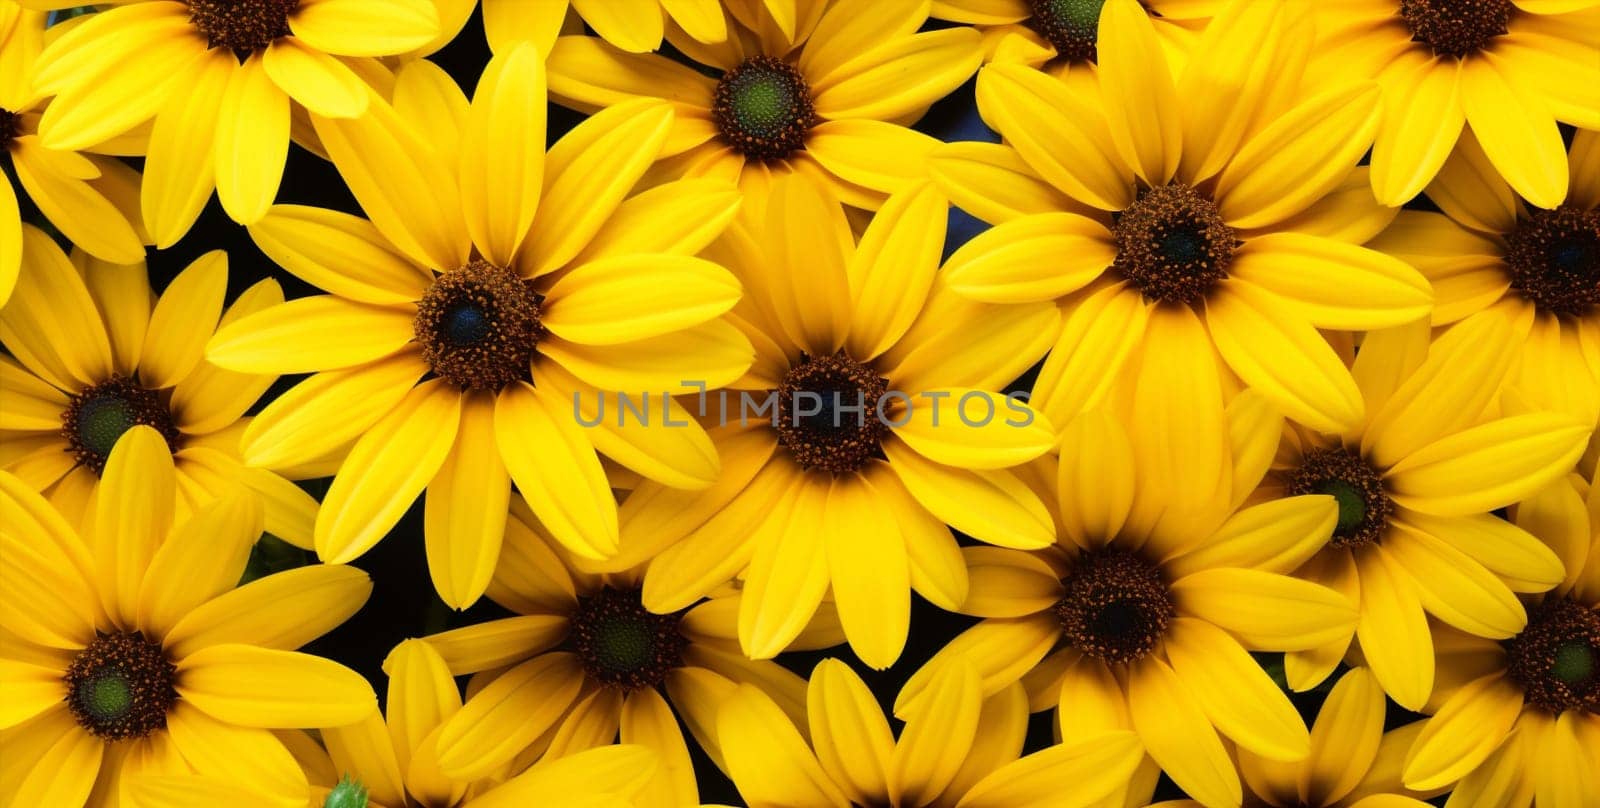 Mockup yellow flower gardening nature beauty flora background bloom bouquet plants group summer close chrysanthemum blossom petal floral up botany bright